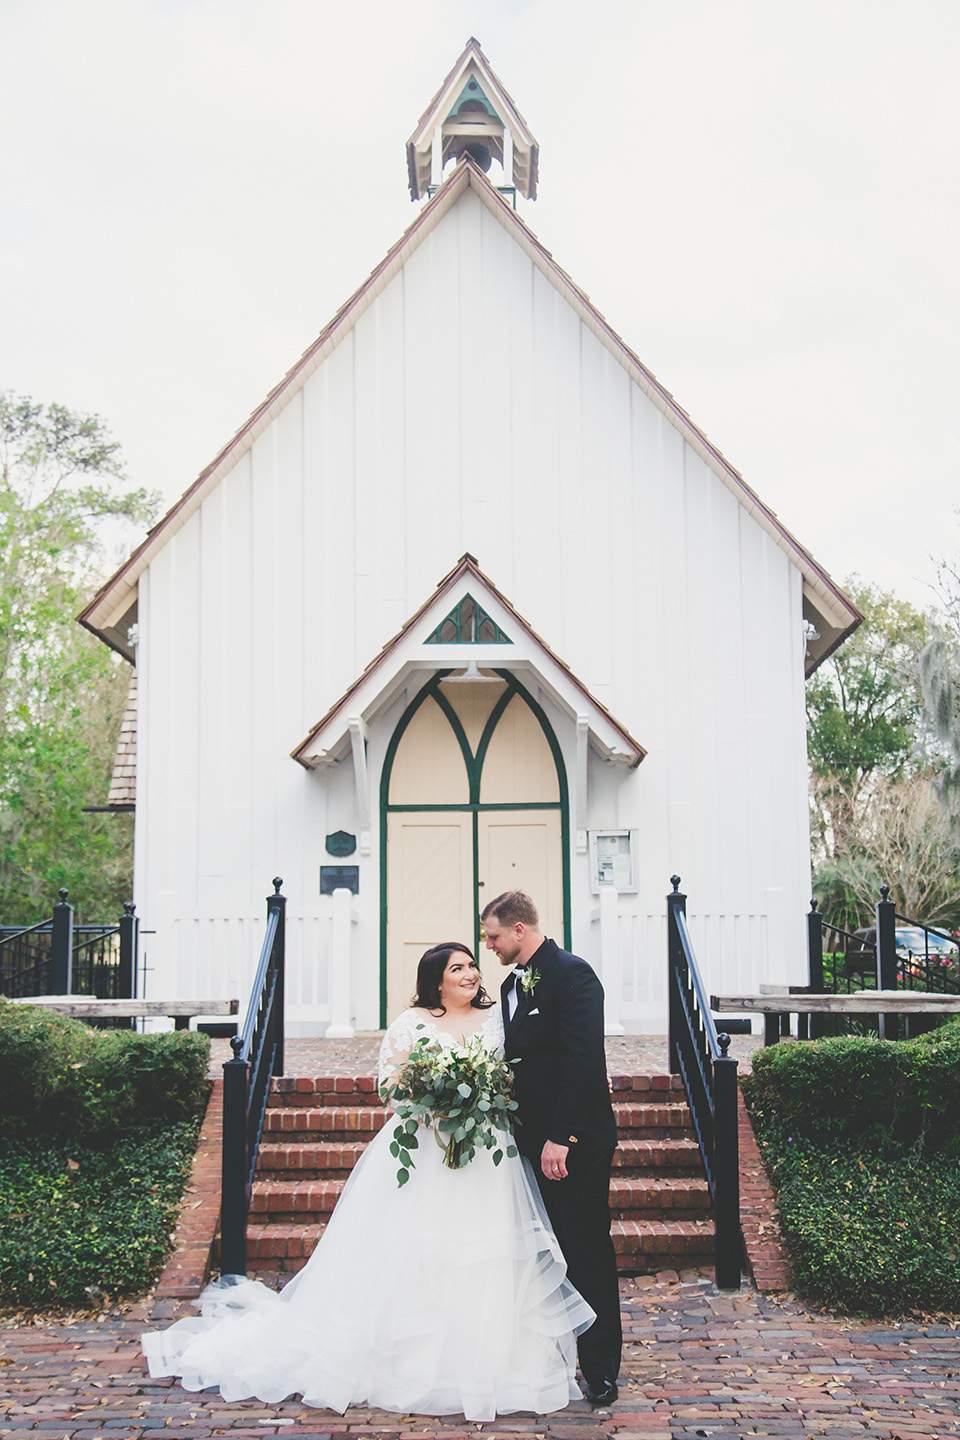 San Marco Preservation Hall is one of the beautiful Jacksonville wedding chapels